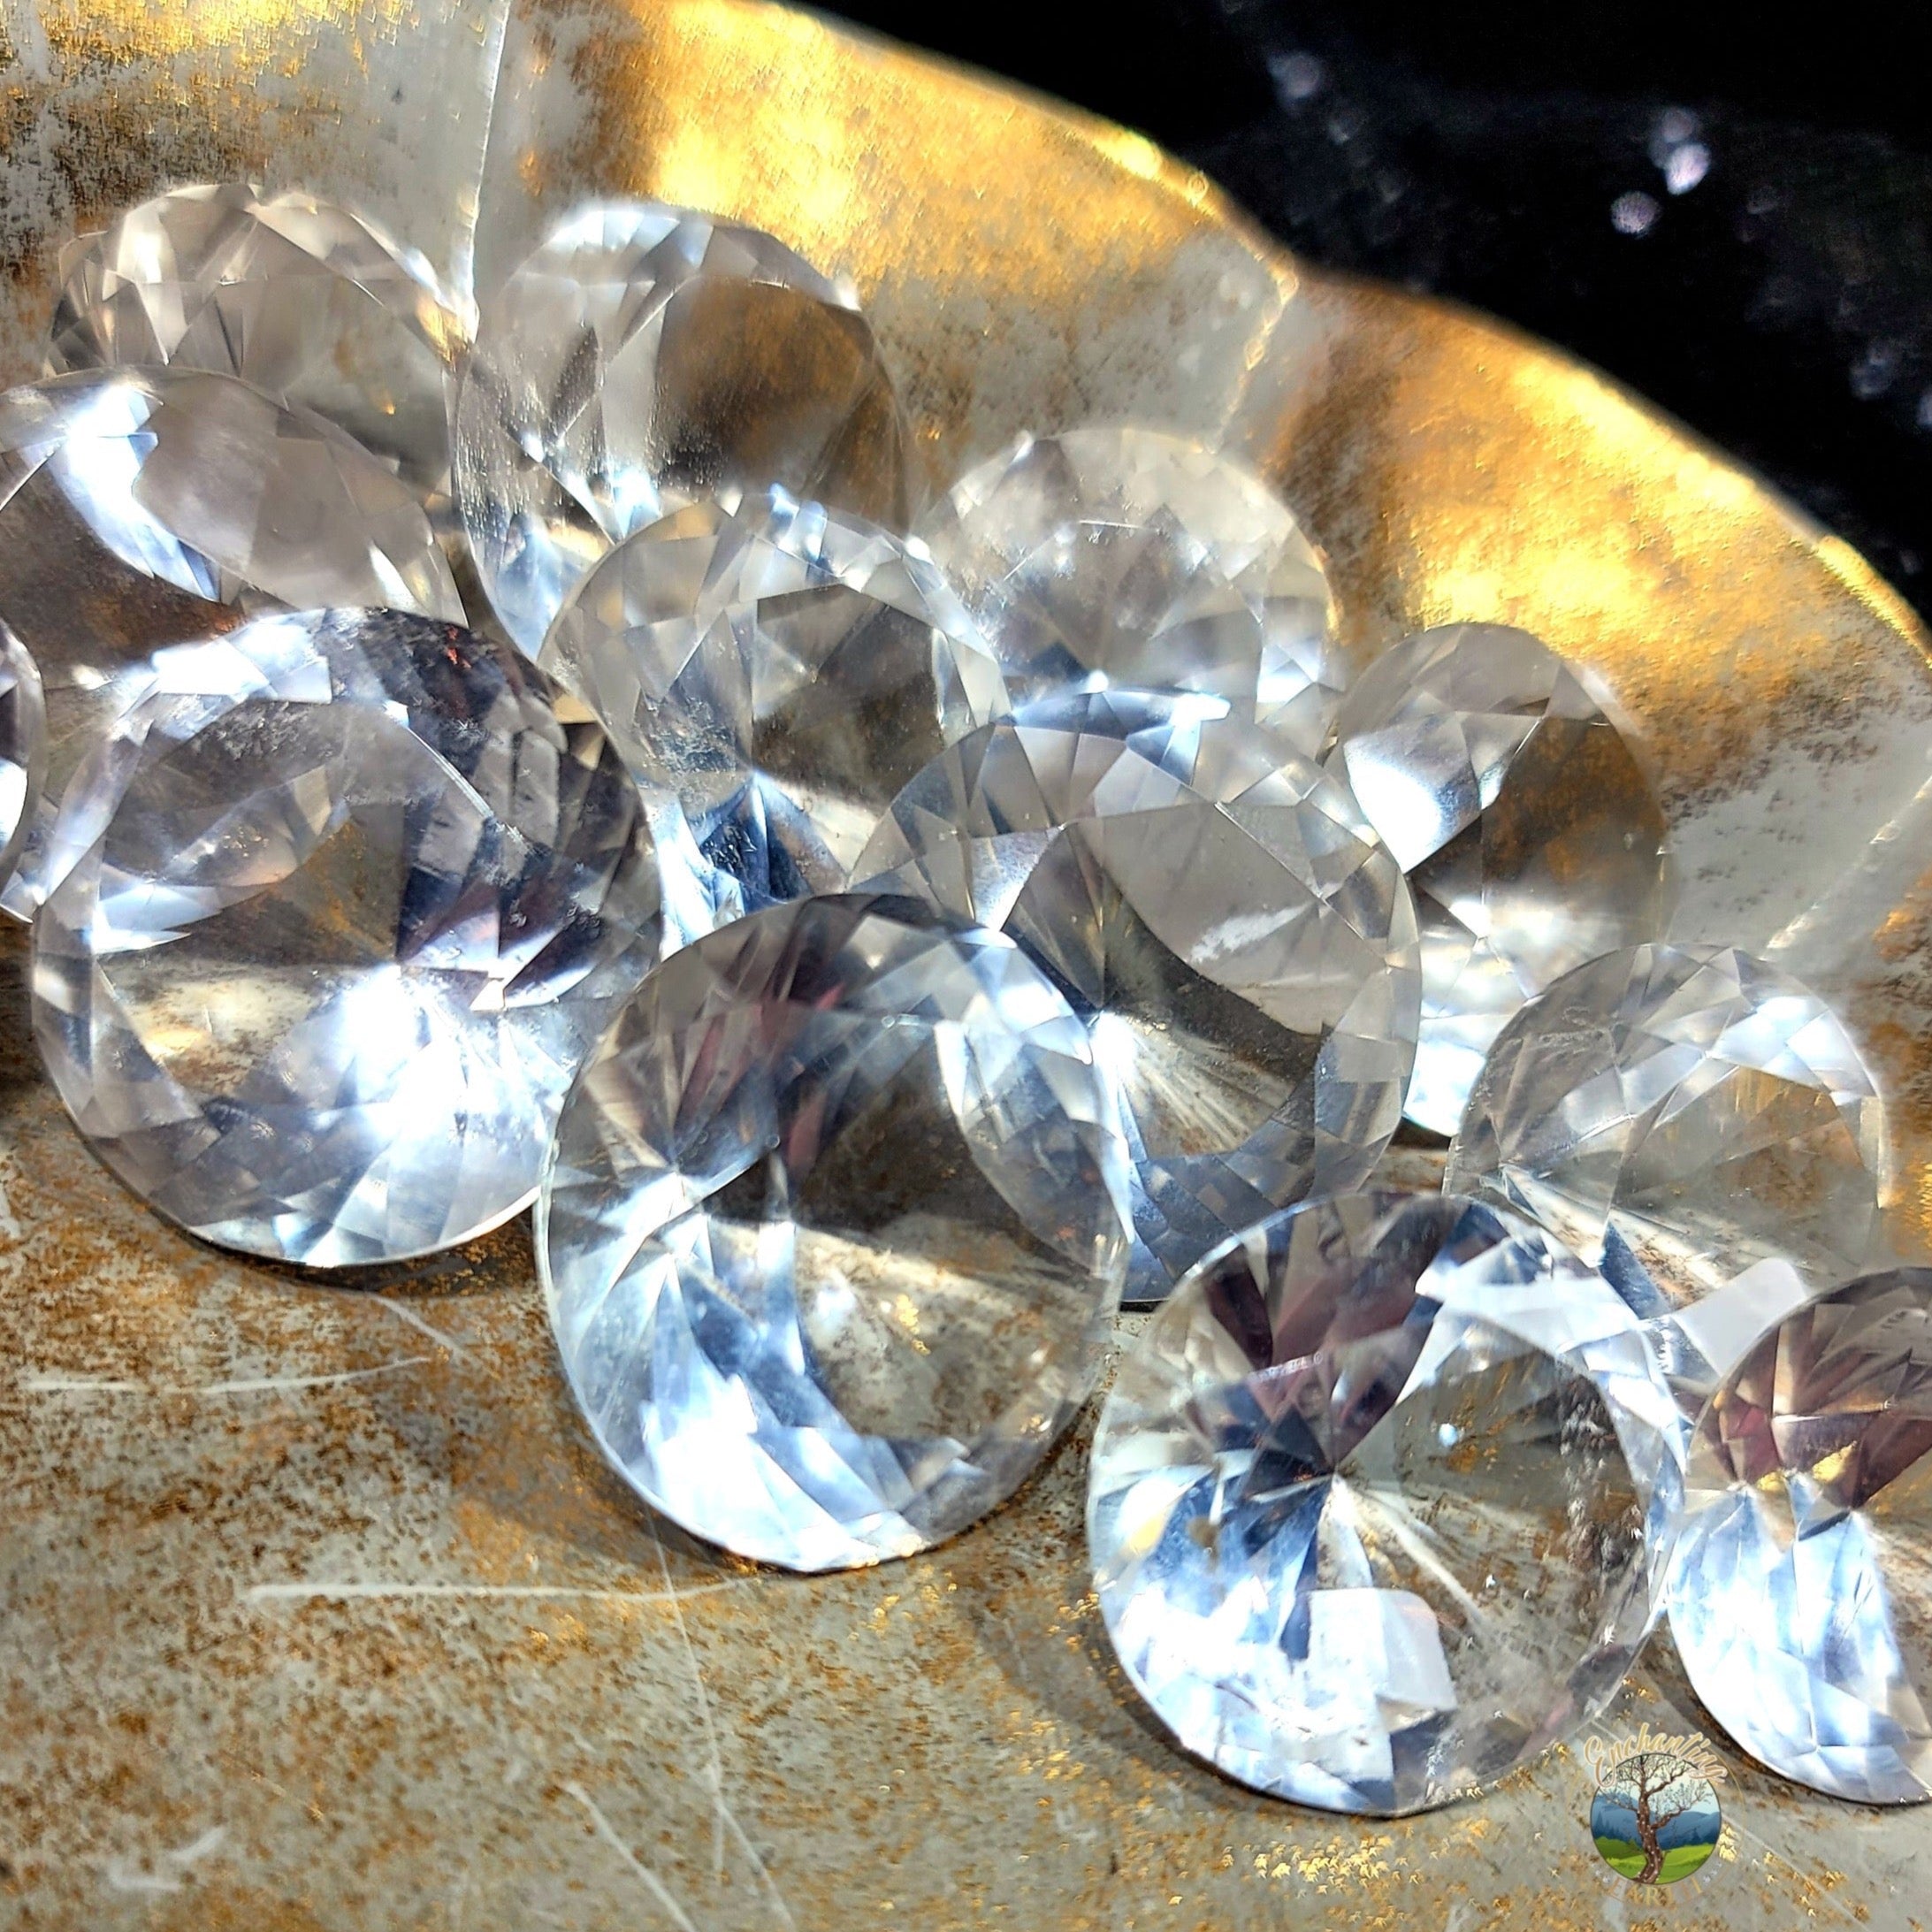 Clear Quartz Faceted Gem for Amplification, Manifestation and Healing